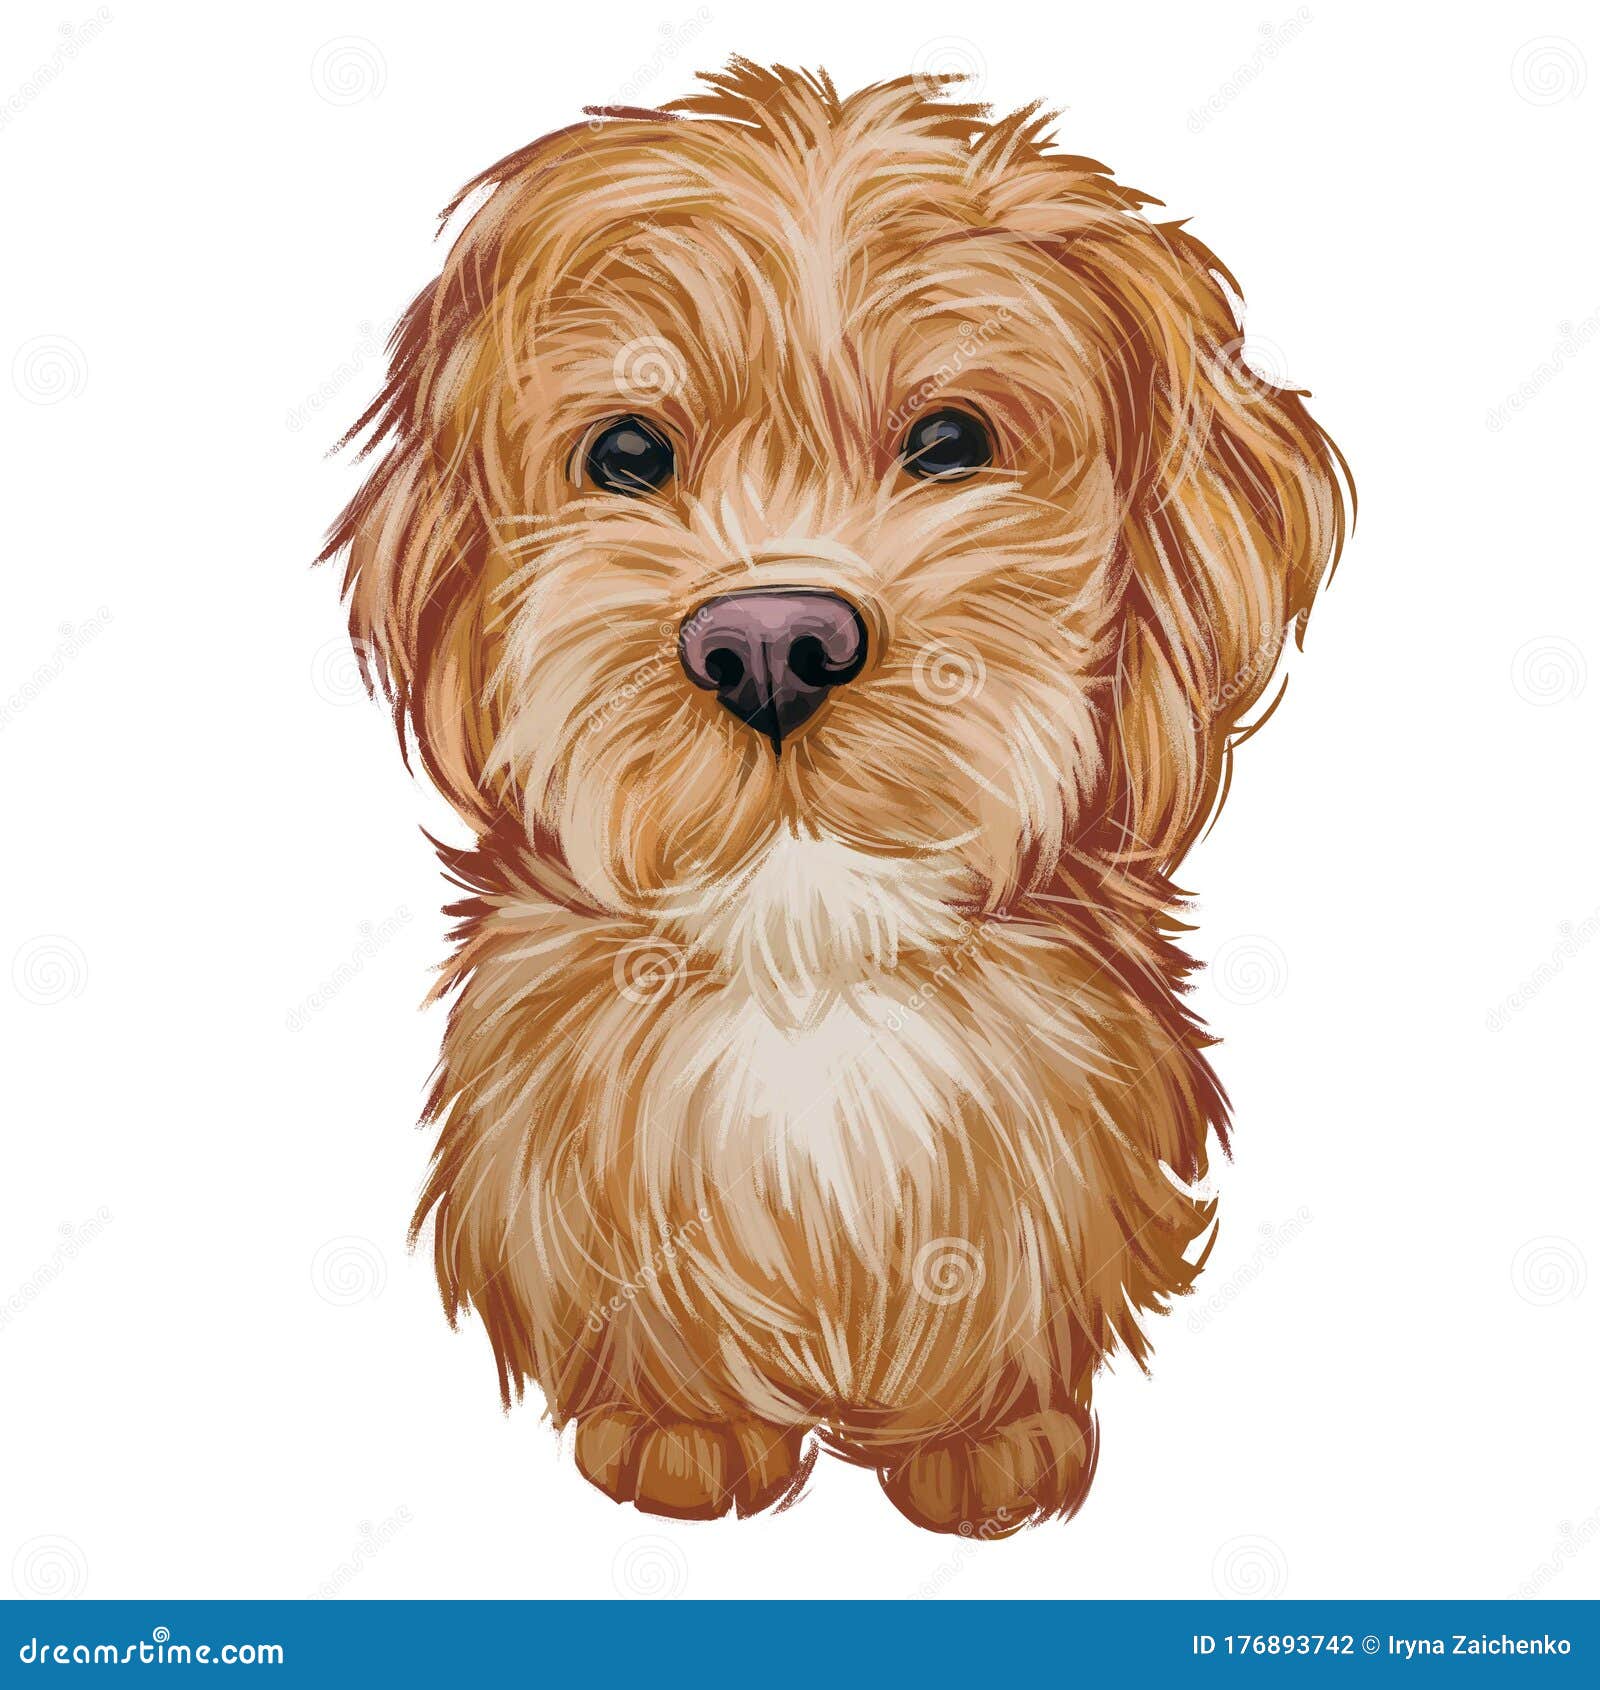 Labradoodle Cartoons, Illustrations & Vector Stock Images